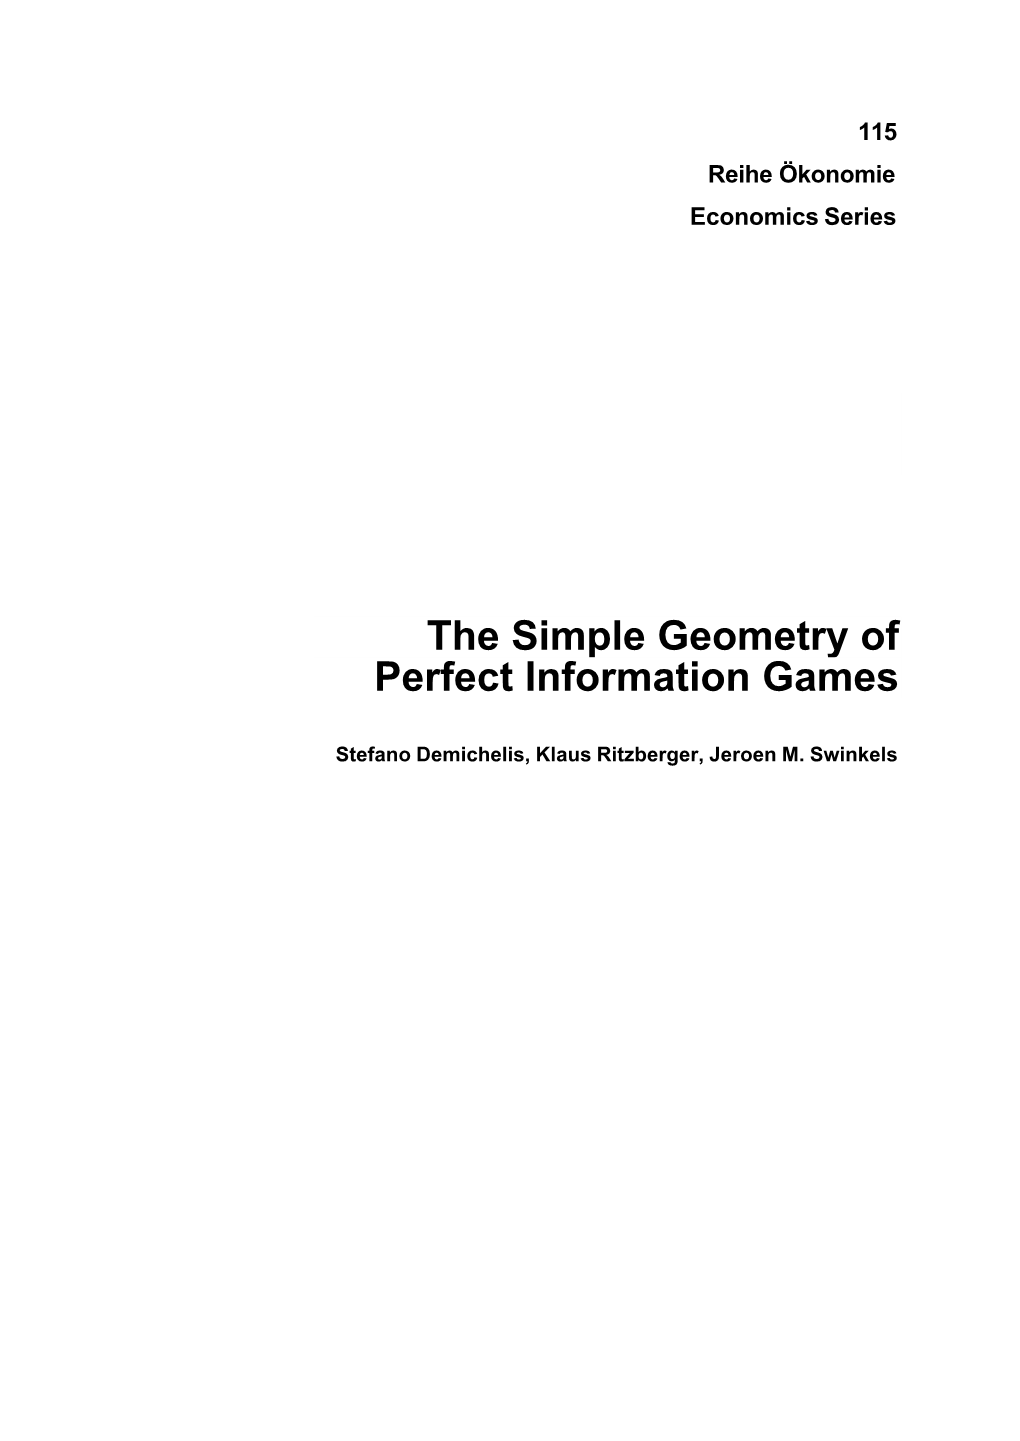 The Simple Geometry of Perfect Information Games